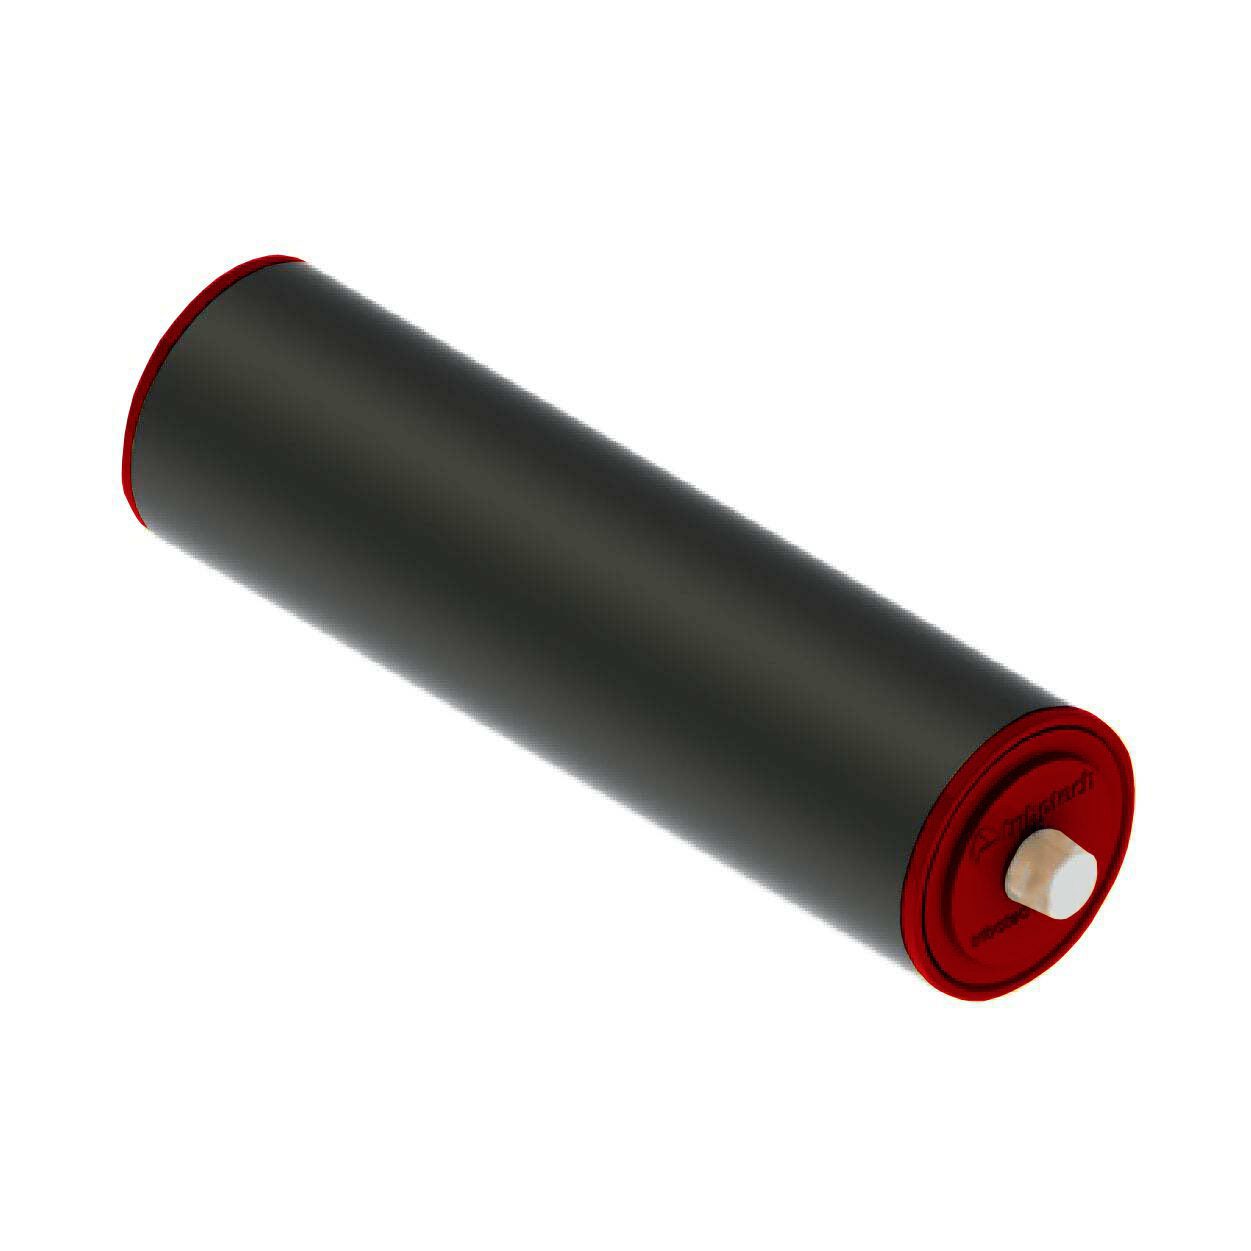 A single cylindrical battery with a black body and red ends, reminiscent of Weartech Composite Rollers.